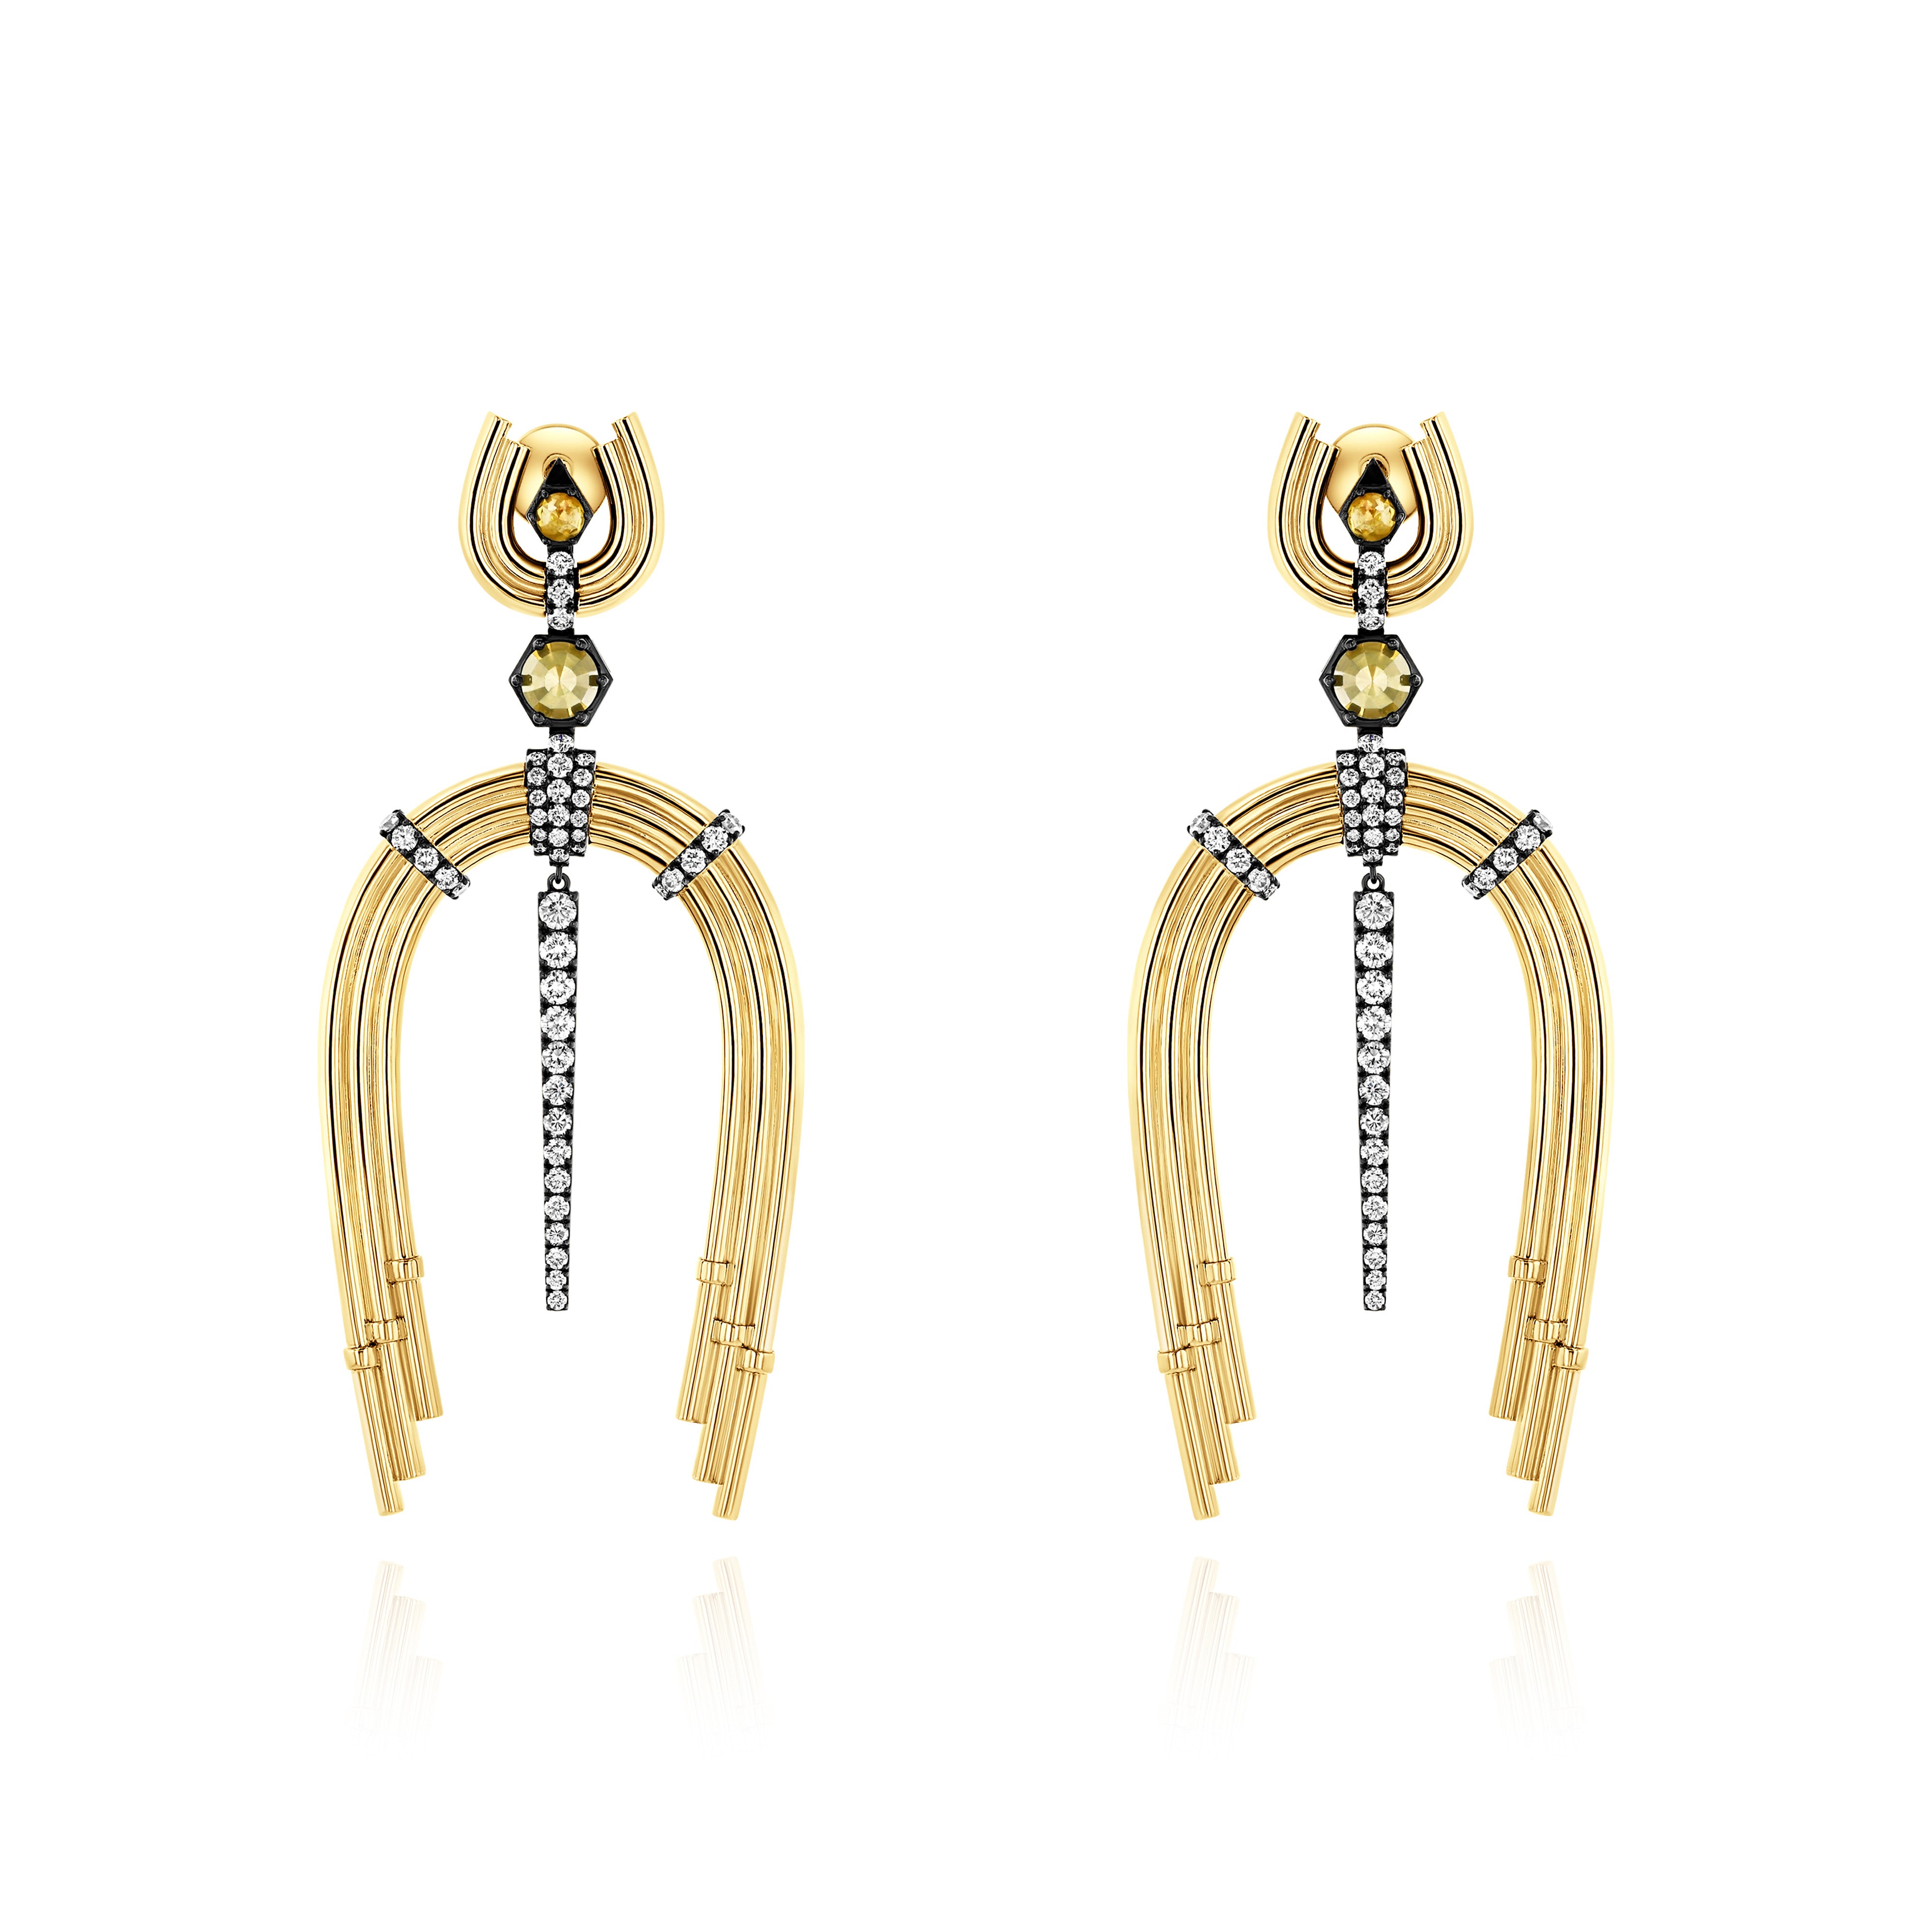 Yellow Gold Earrings with Diamond-lined, Rhodium plated features and horseshoe shapes, Large